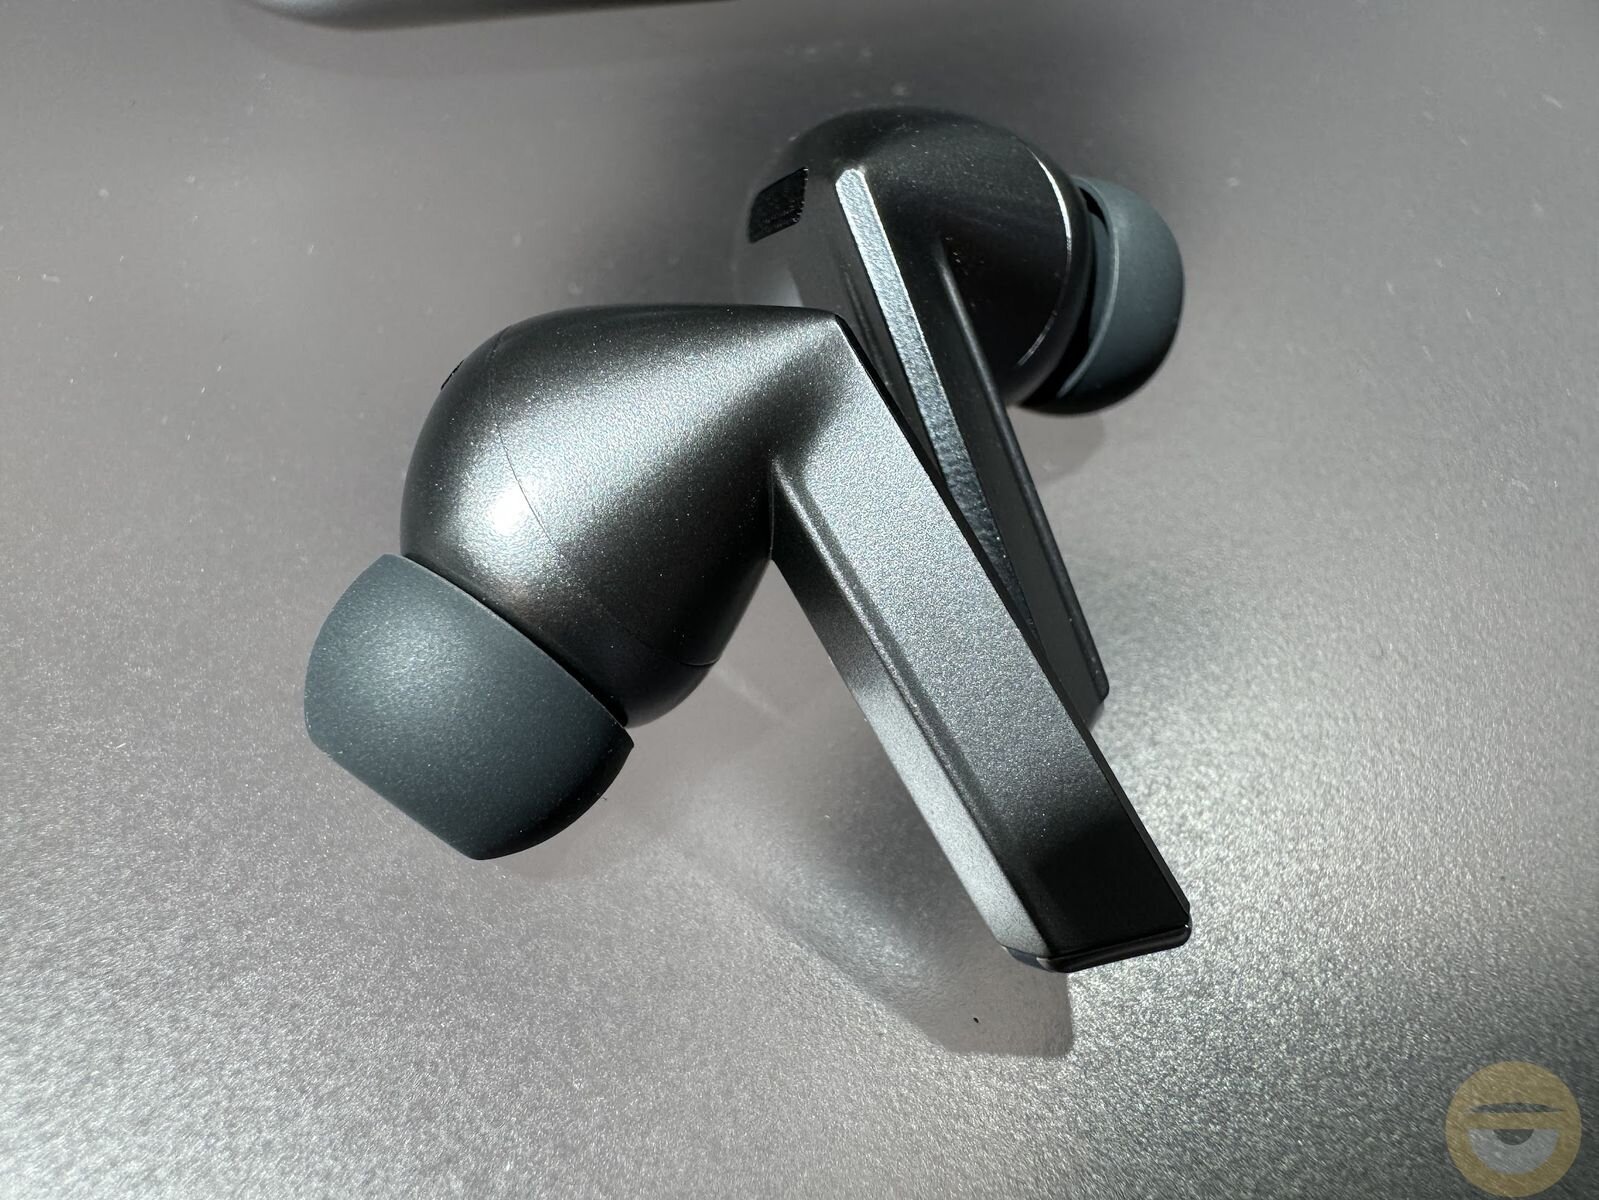 Samsung Halts Production of Galaxy Buds 3 Pro Due to Quality Issues – Samsung